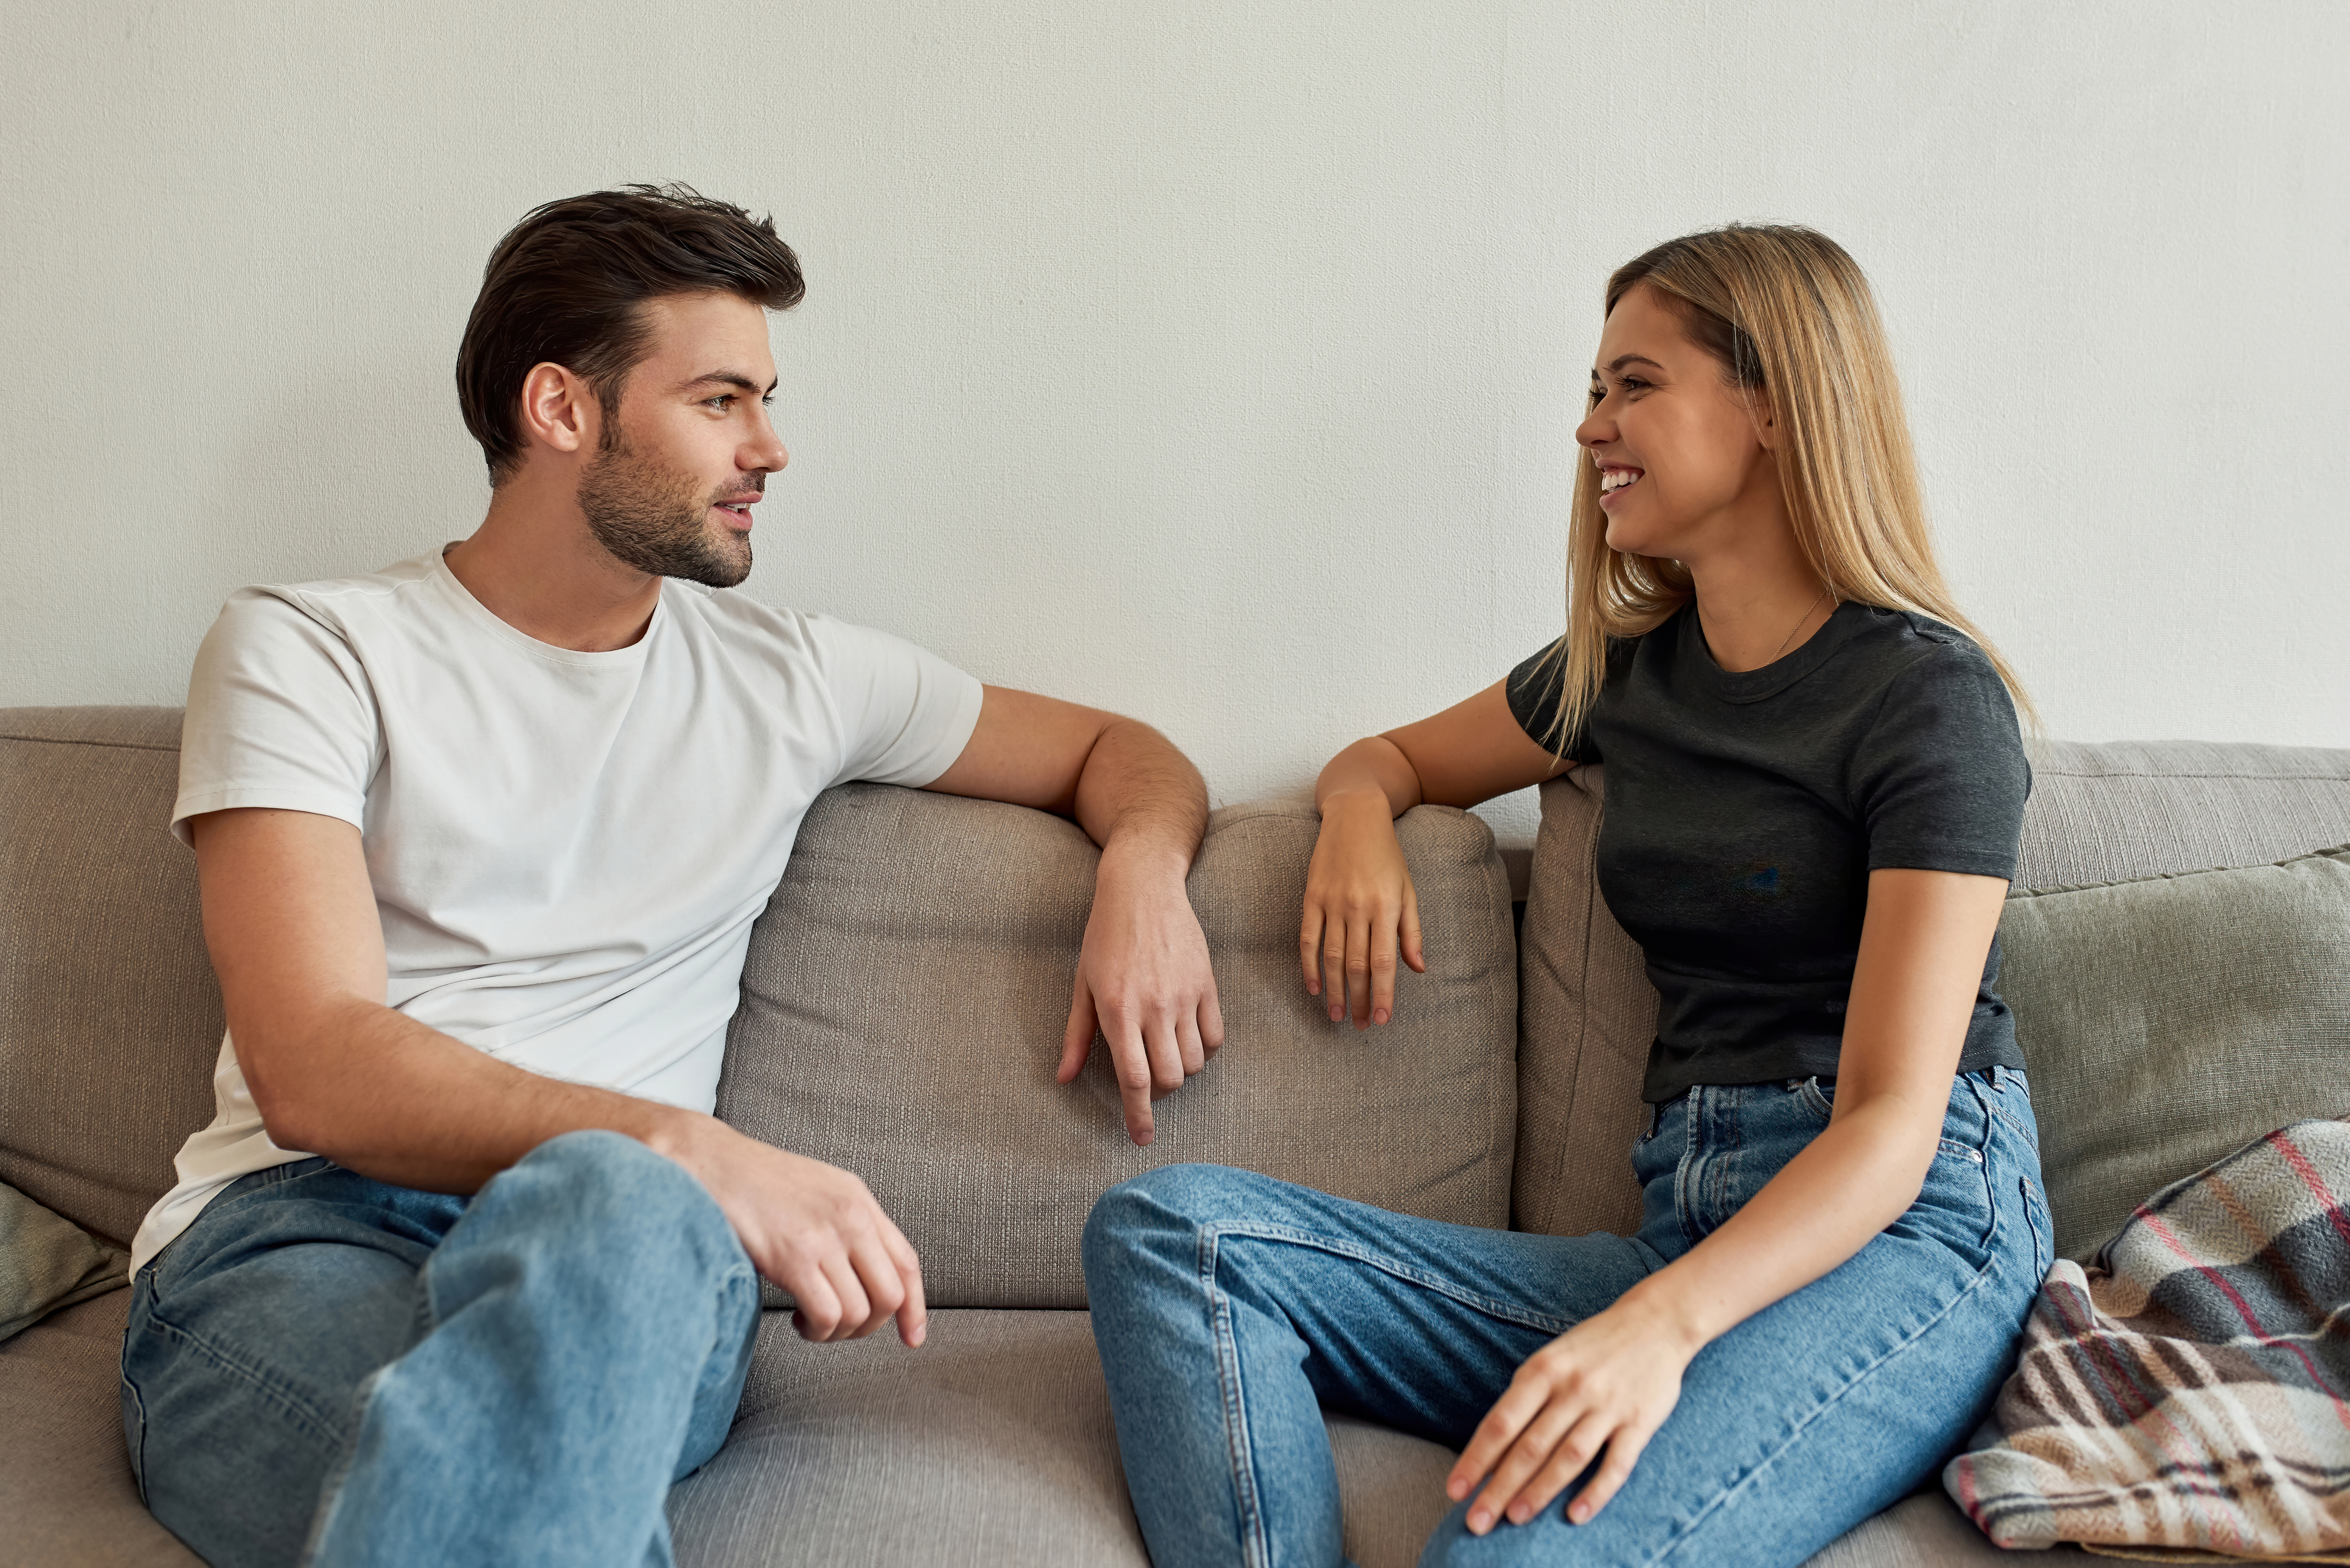 How Important Is It That Your Boyfriend Or Girlfriend Is A Good Listener? Does A Good Listener Need To Give Advice Or Just Listen?